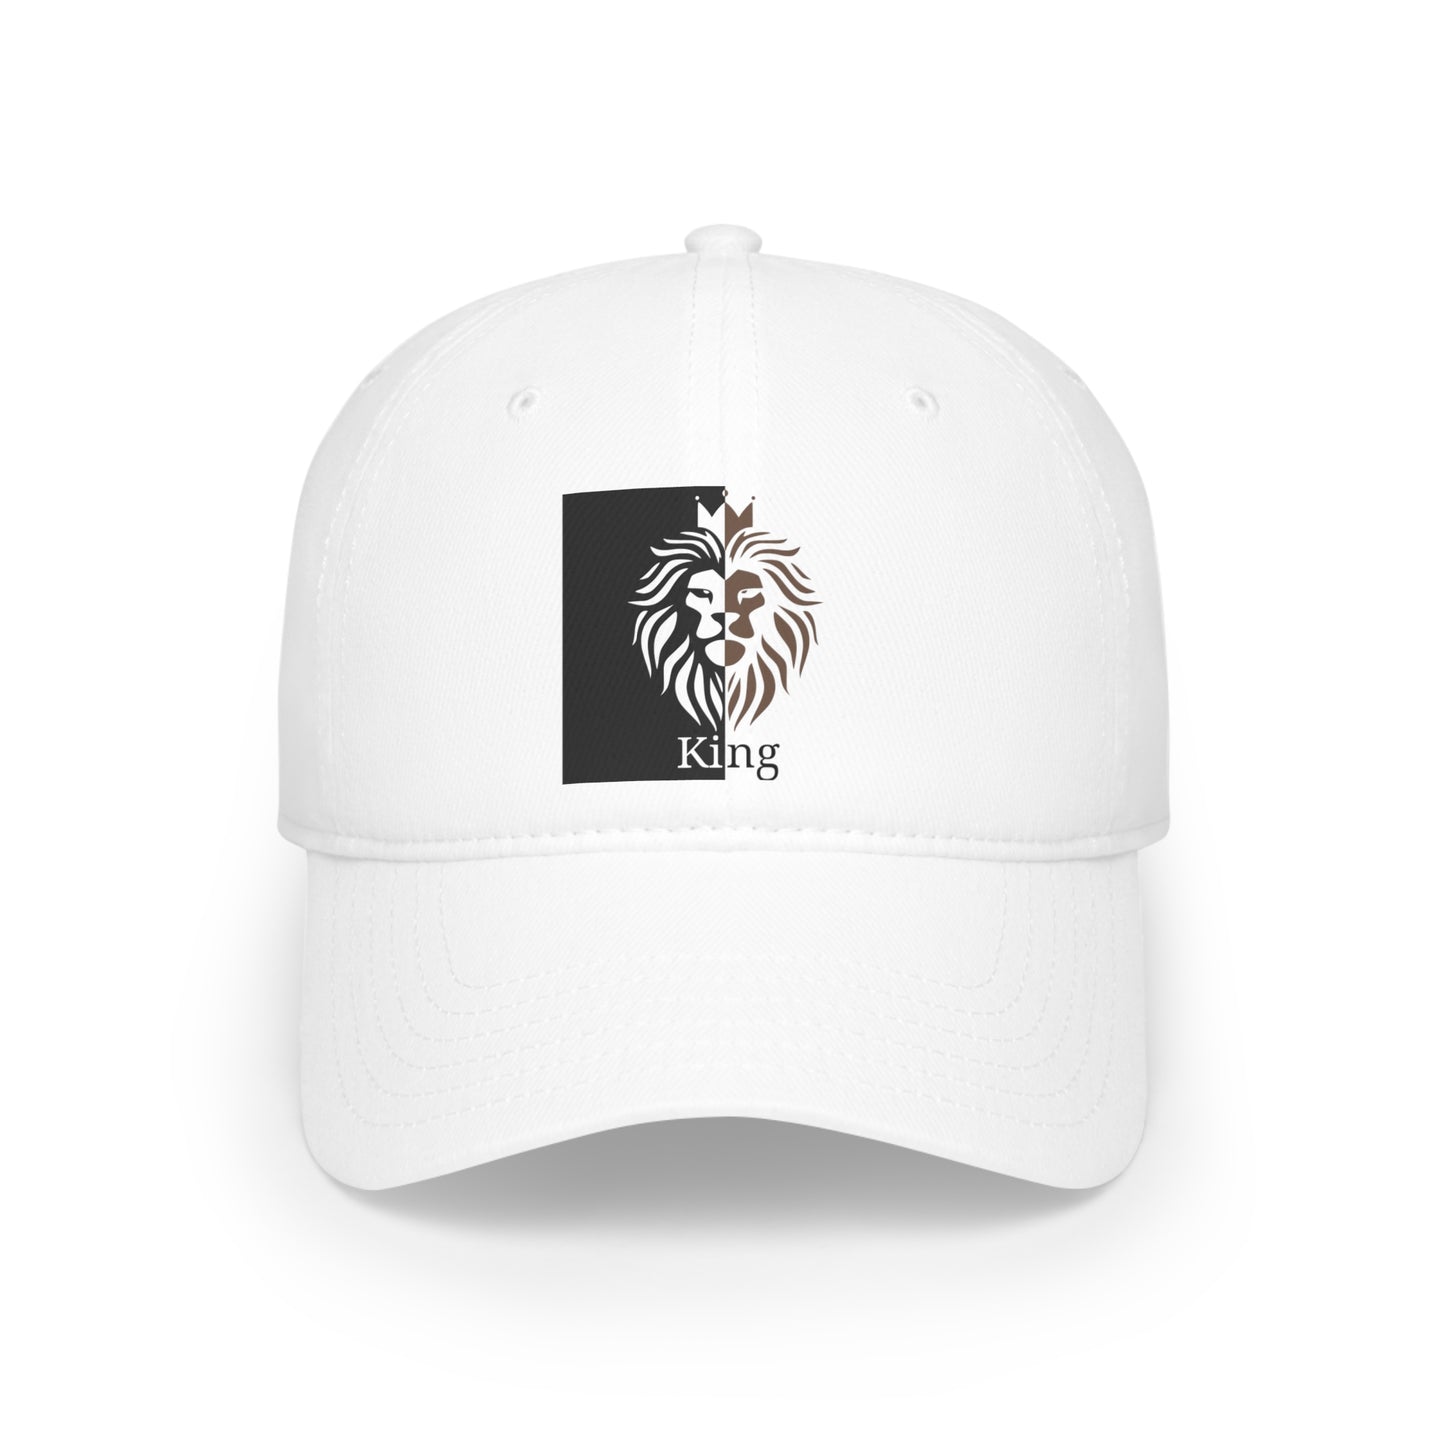 King - Lion With Crown - Low Profile Baseball Cap